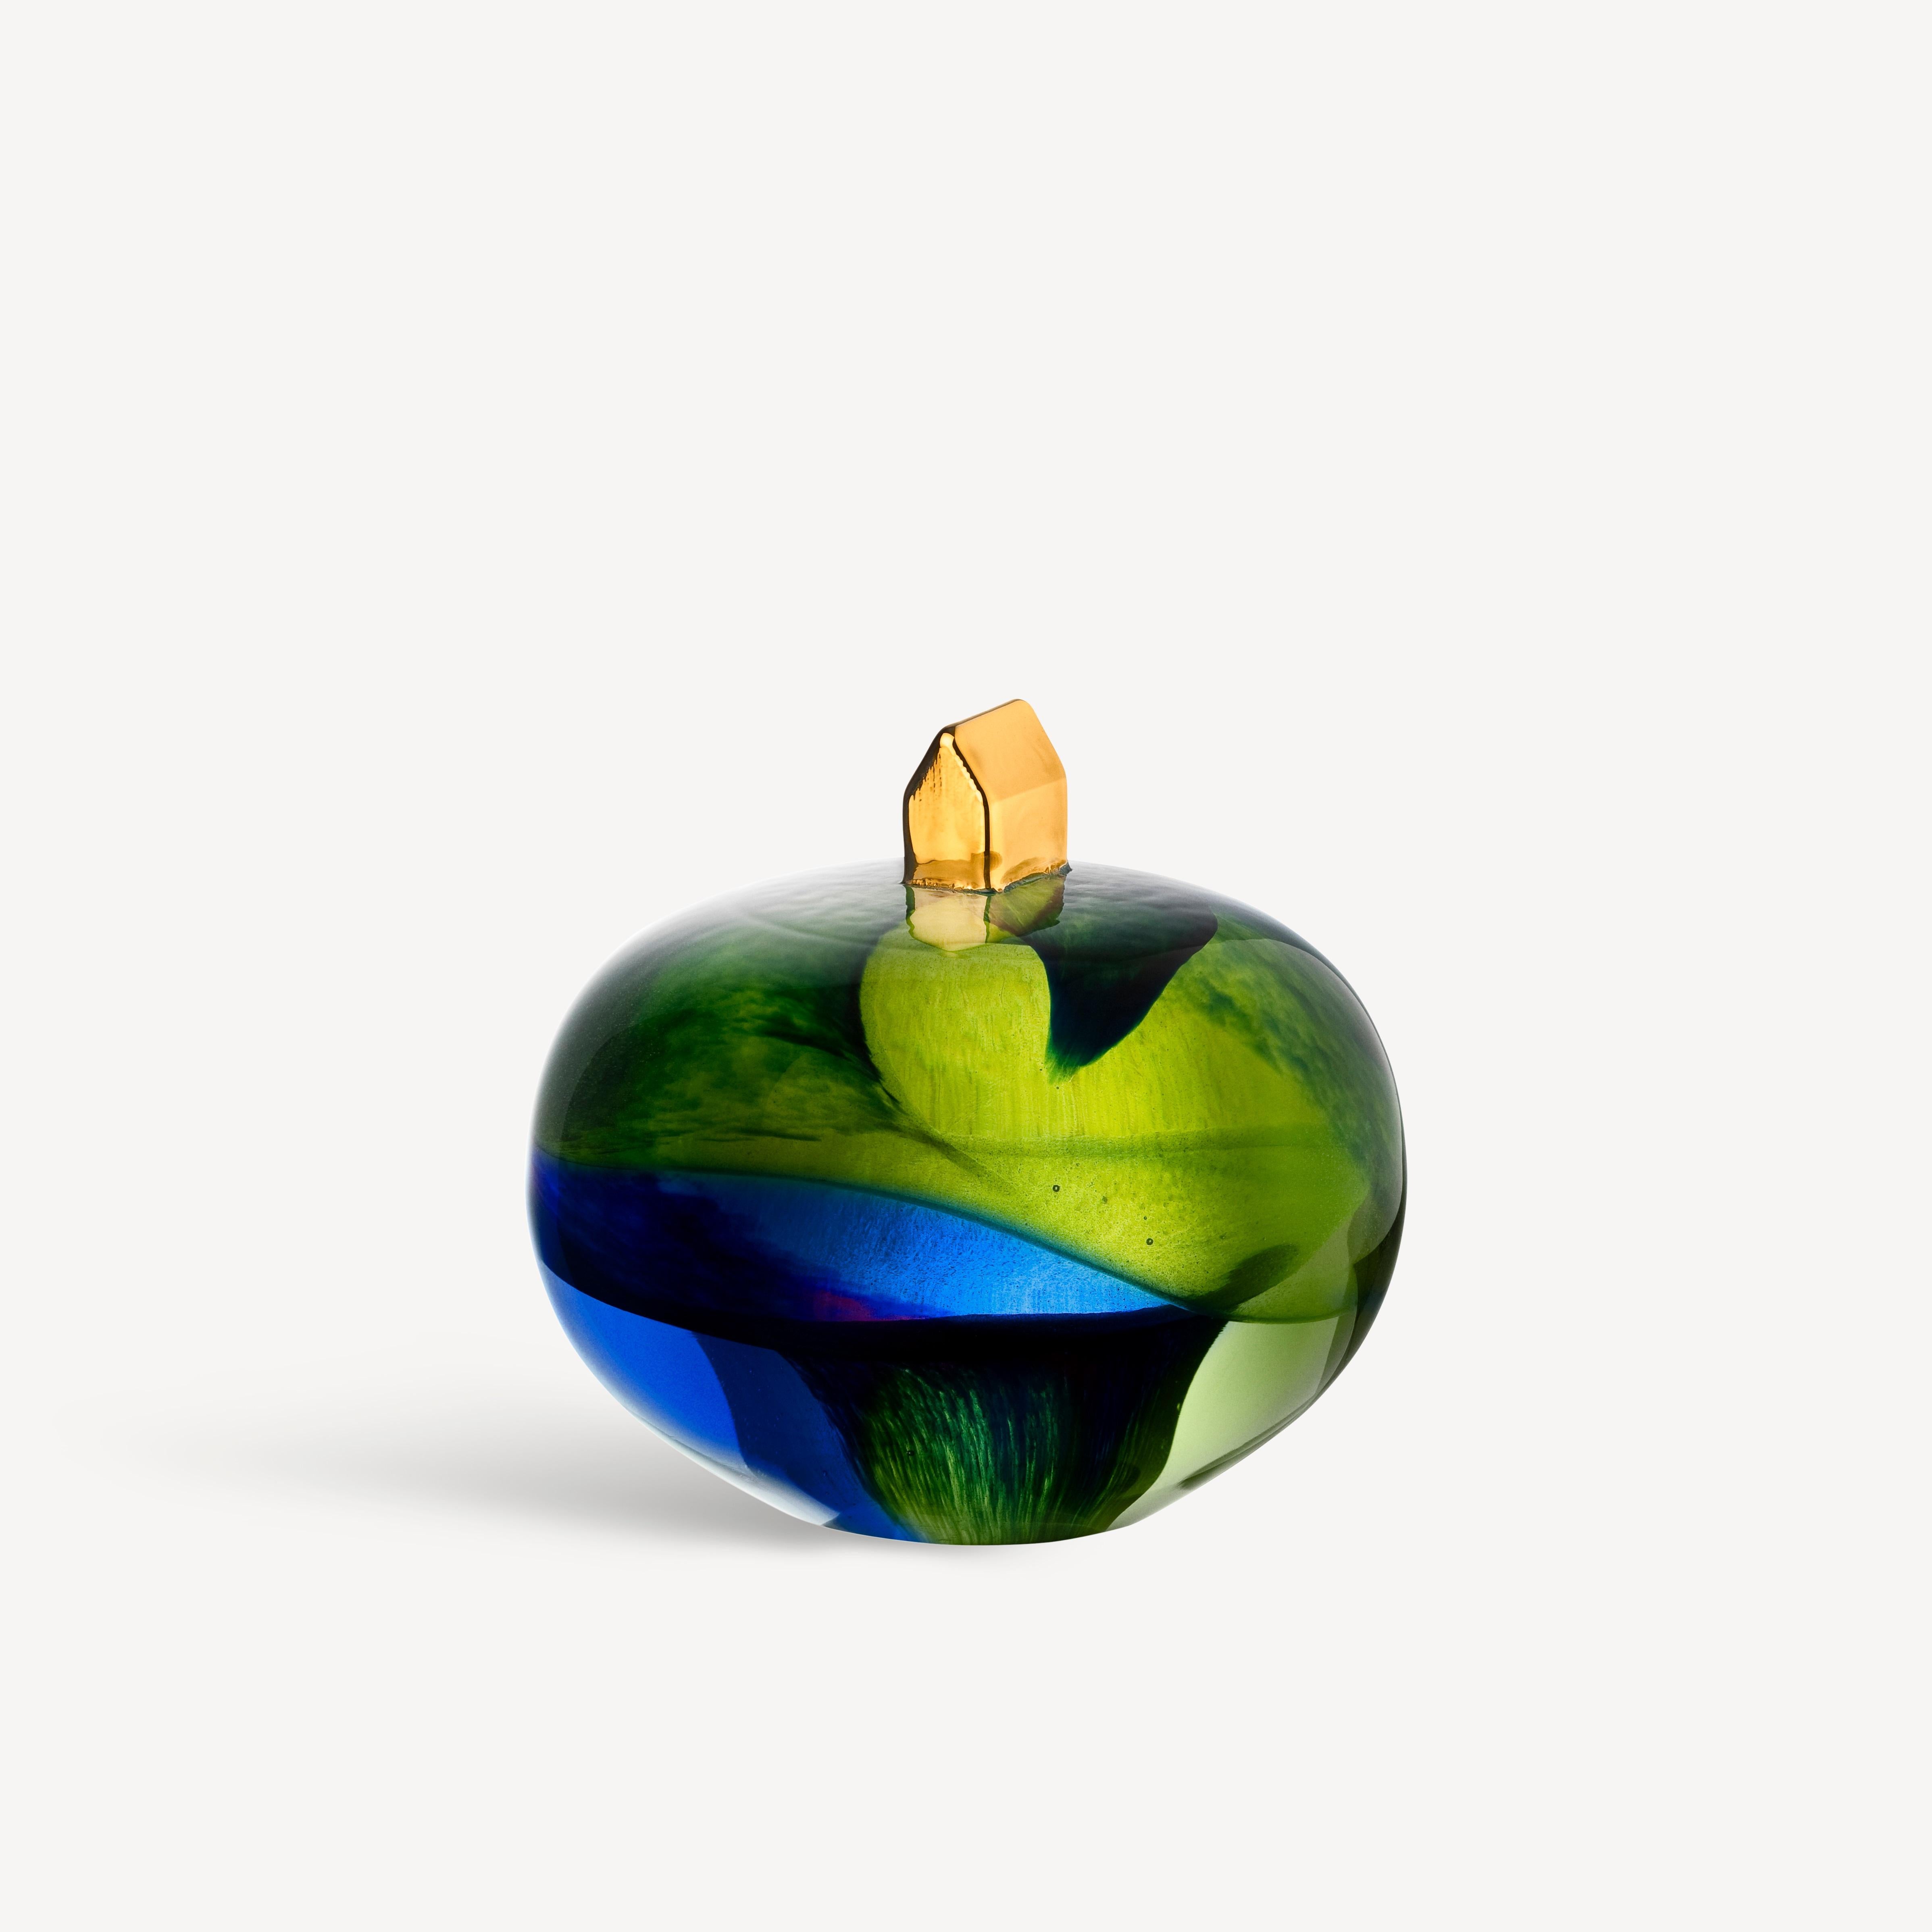 With Earth Home, the renowned glass artist Bertil Vallien has created a miniature world inspired by our place on the planet. The object in clear glass is colored light green and blue and has a small house, hand-painted with real 21 karat gold, at